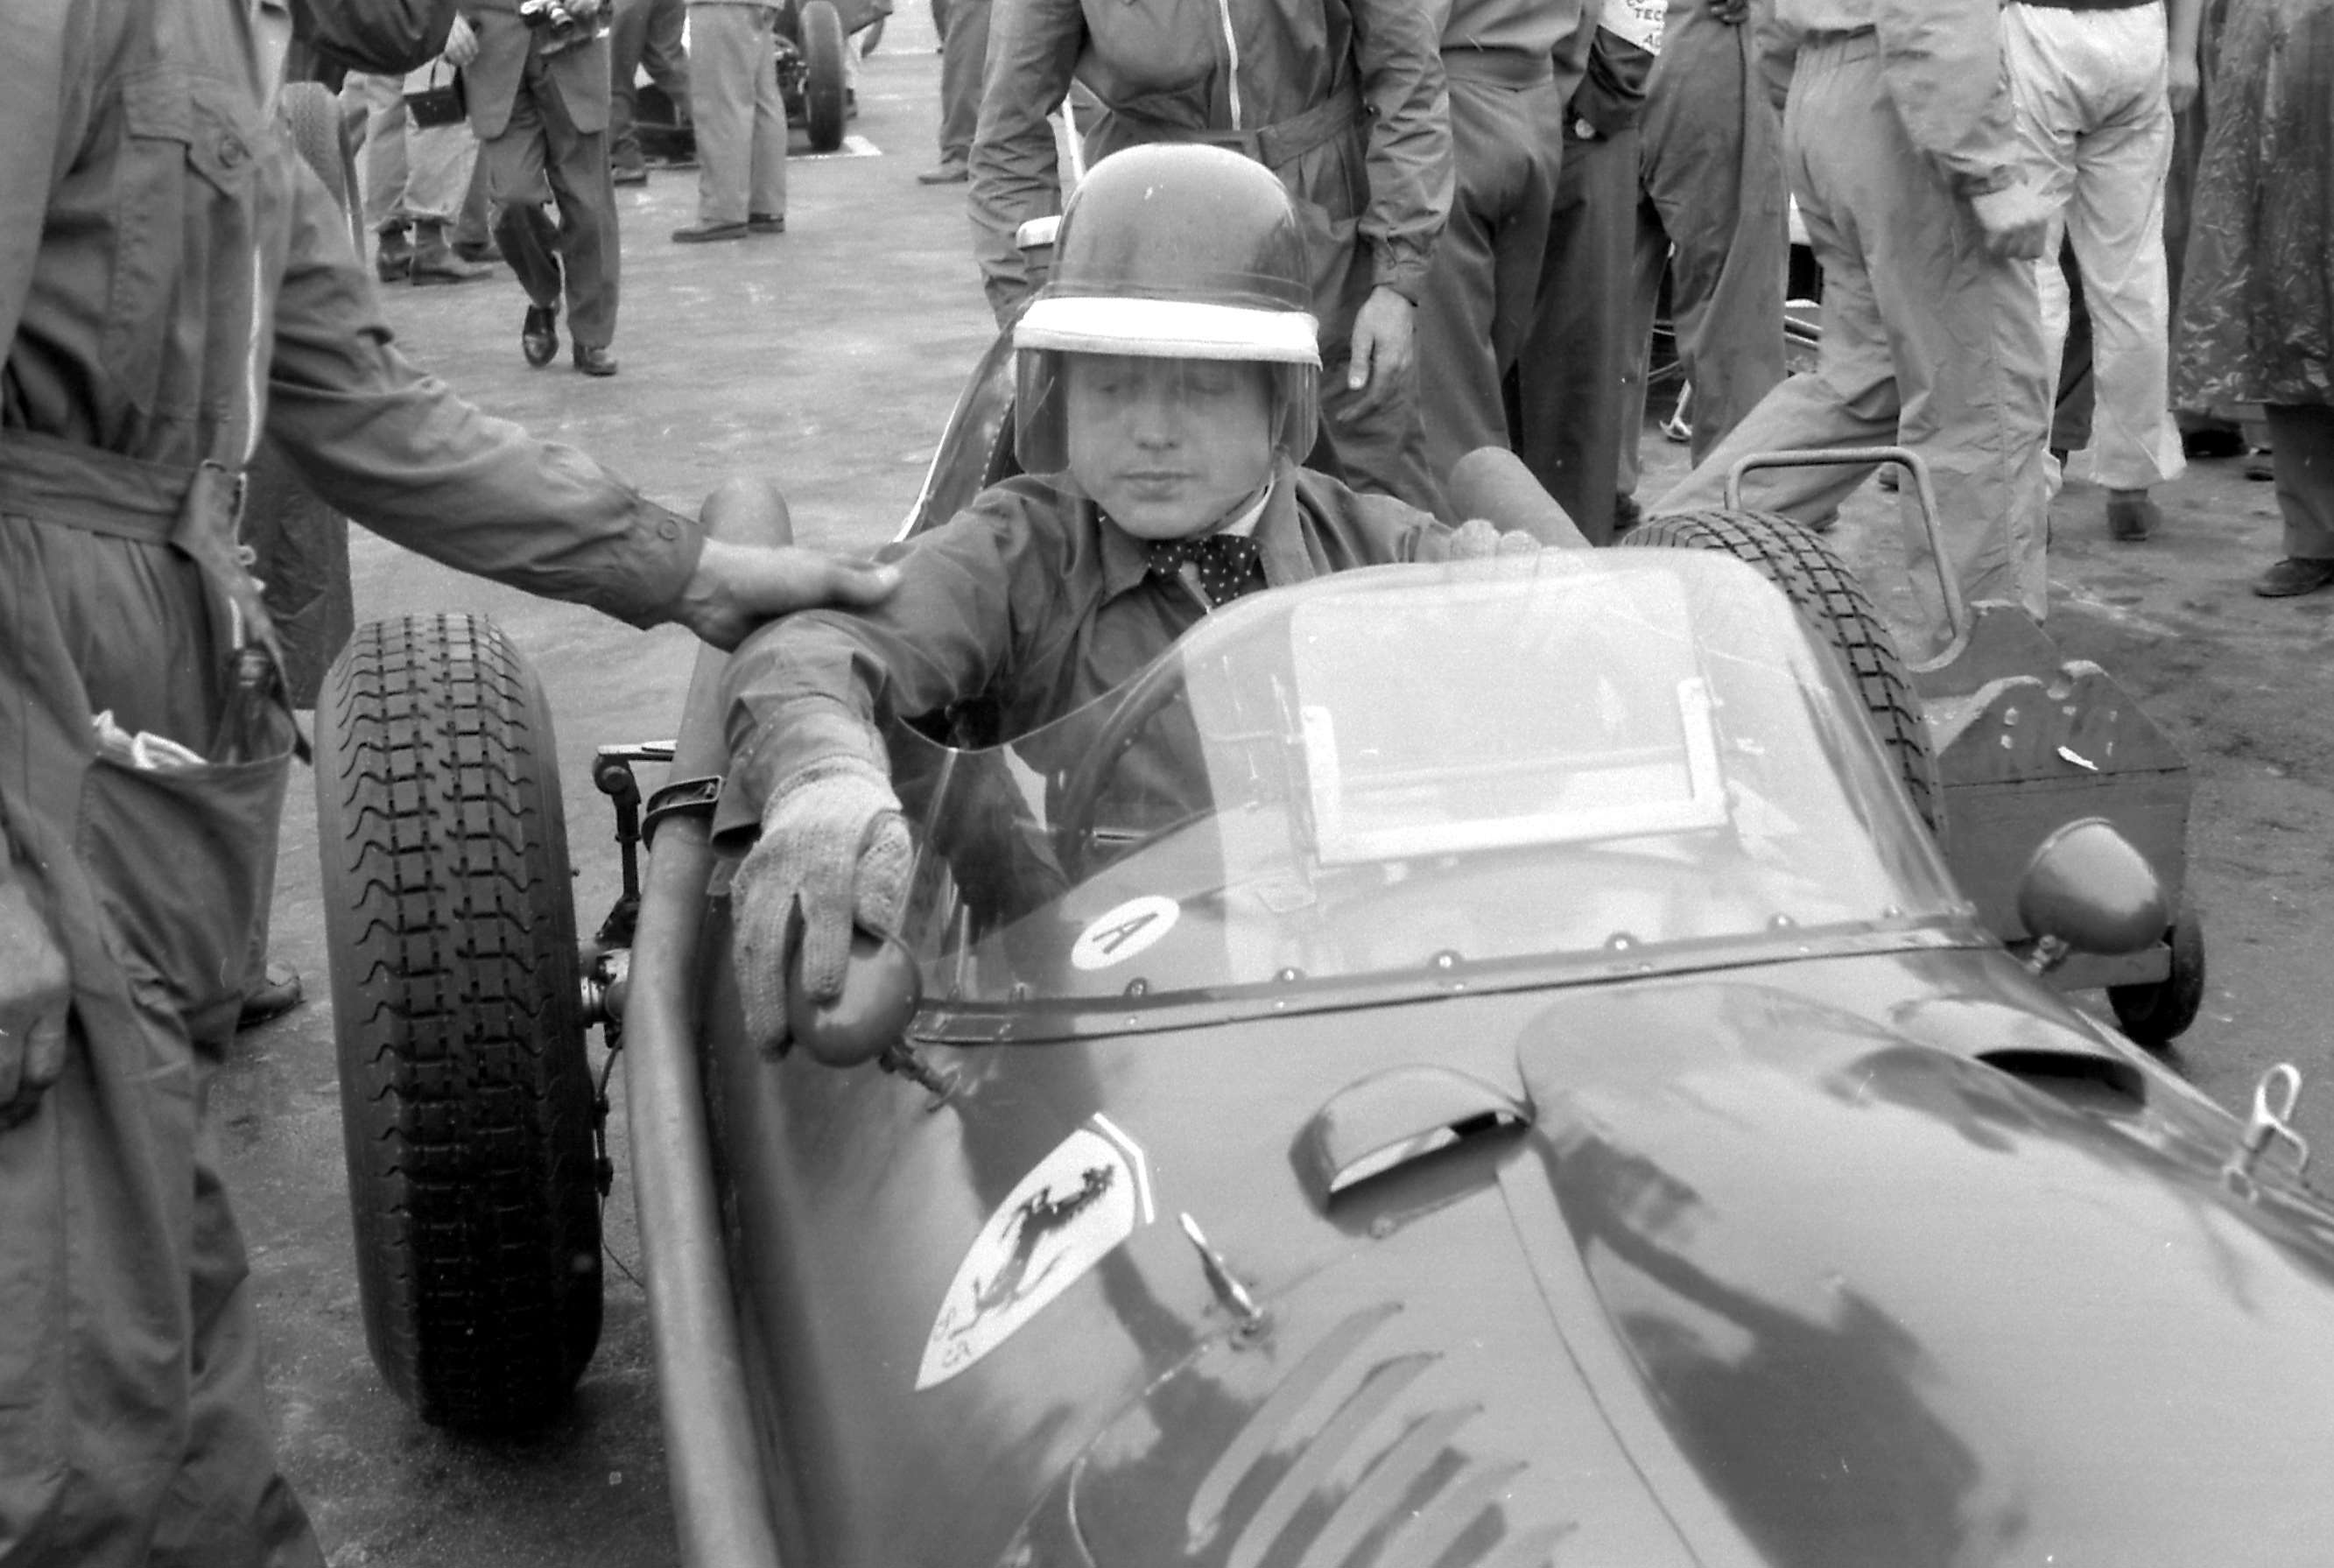 2 - ‘The Farnham Flyer’ carefully adjusting his Ferrari’s rearview mirrors as the clock ticks down to the damp start of the 1958 Portuguese GP